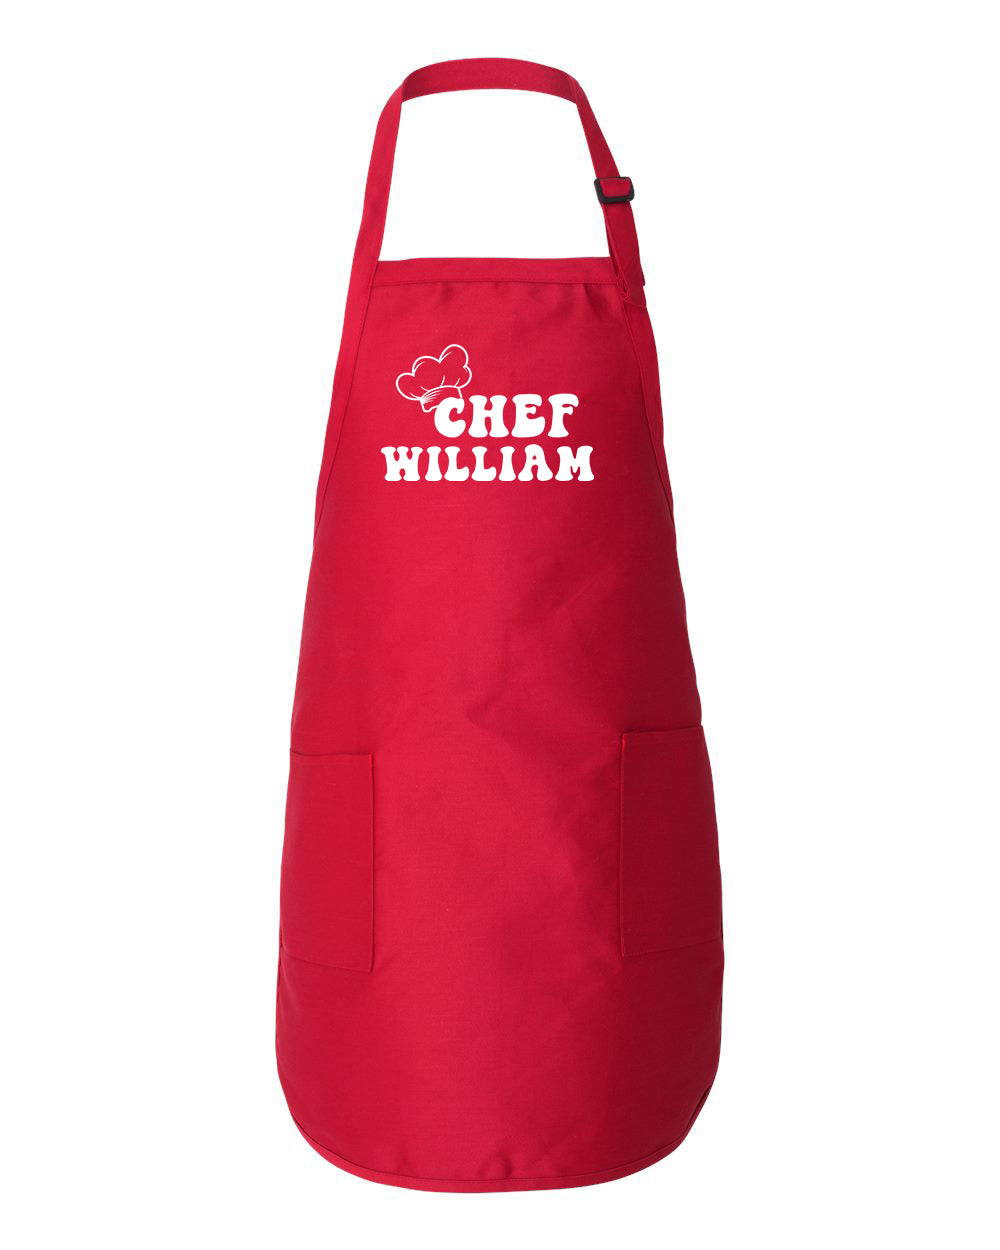 Personalized Apron With Chef Name